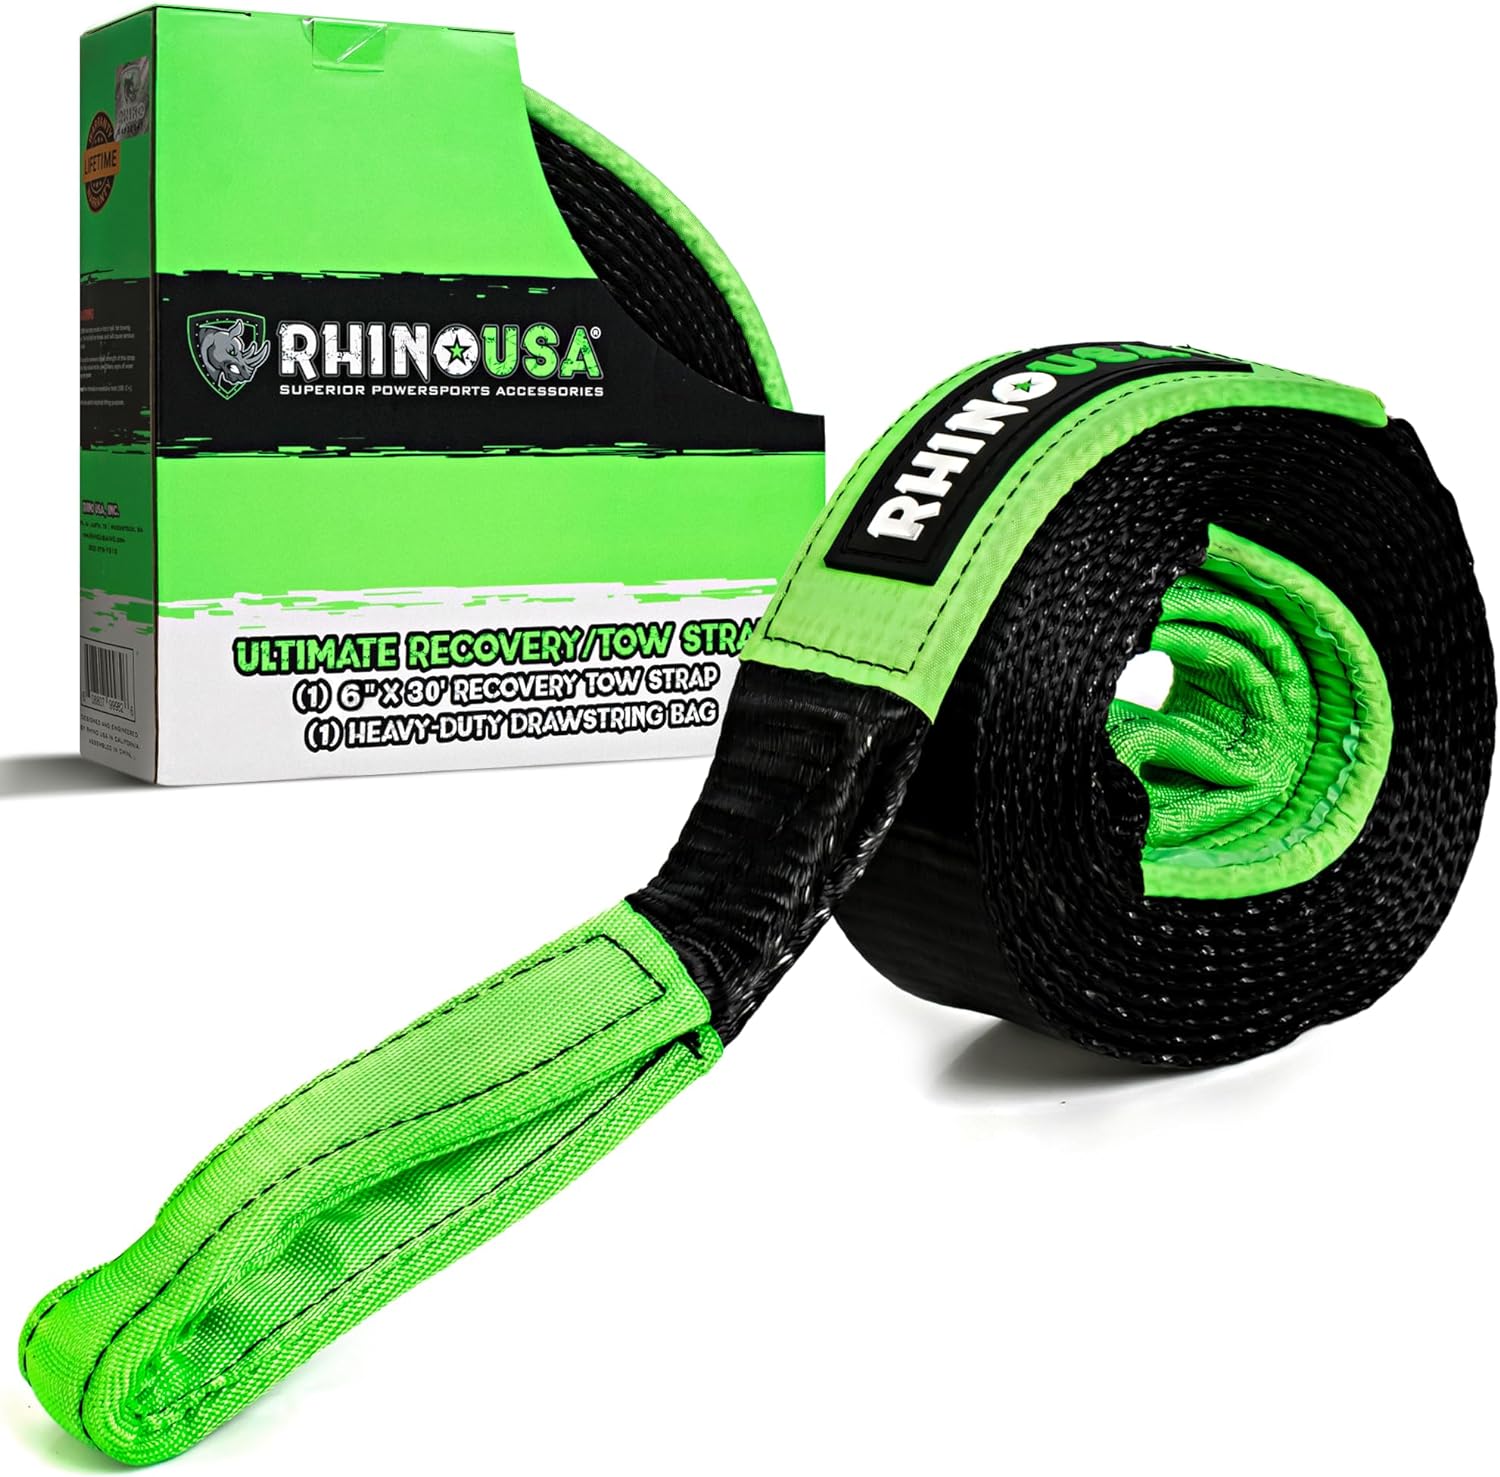 6" x 30' Ultimate Recovery Tow Strap